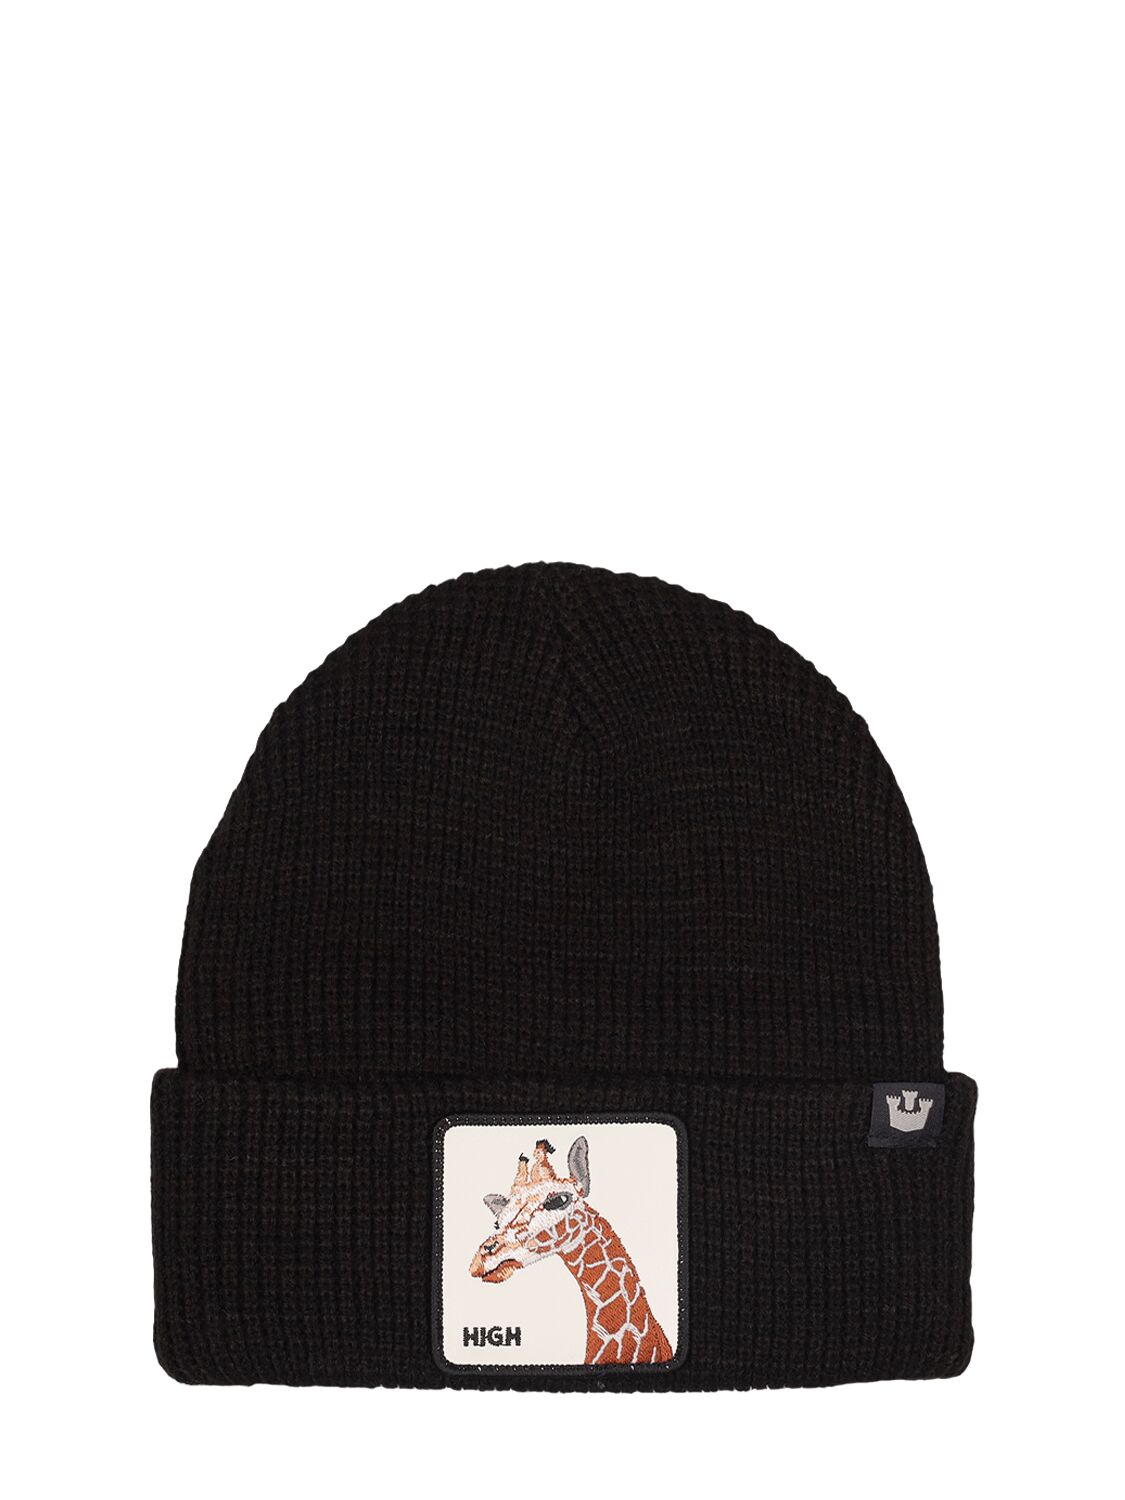 Goorin Bros Up There Knit Beanie In Black